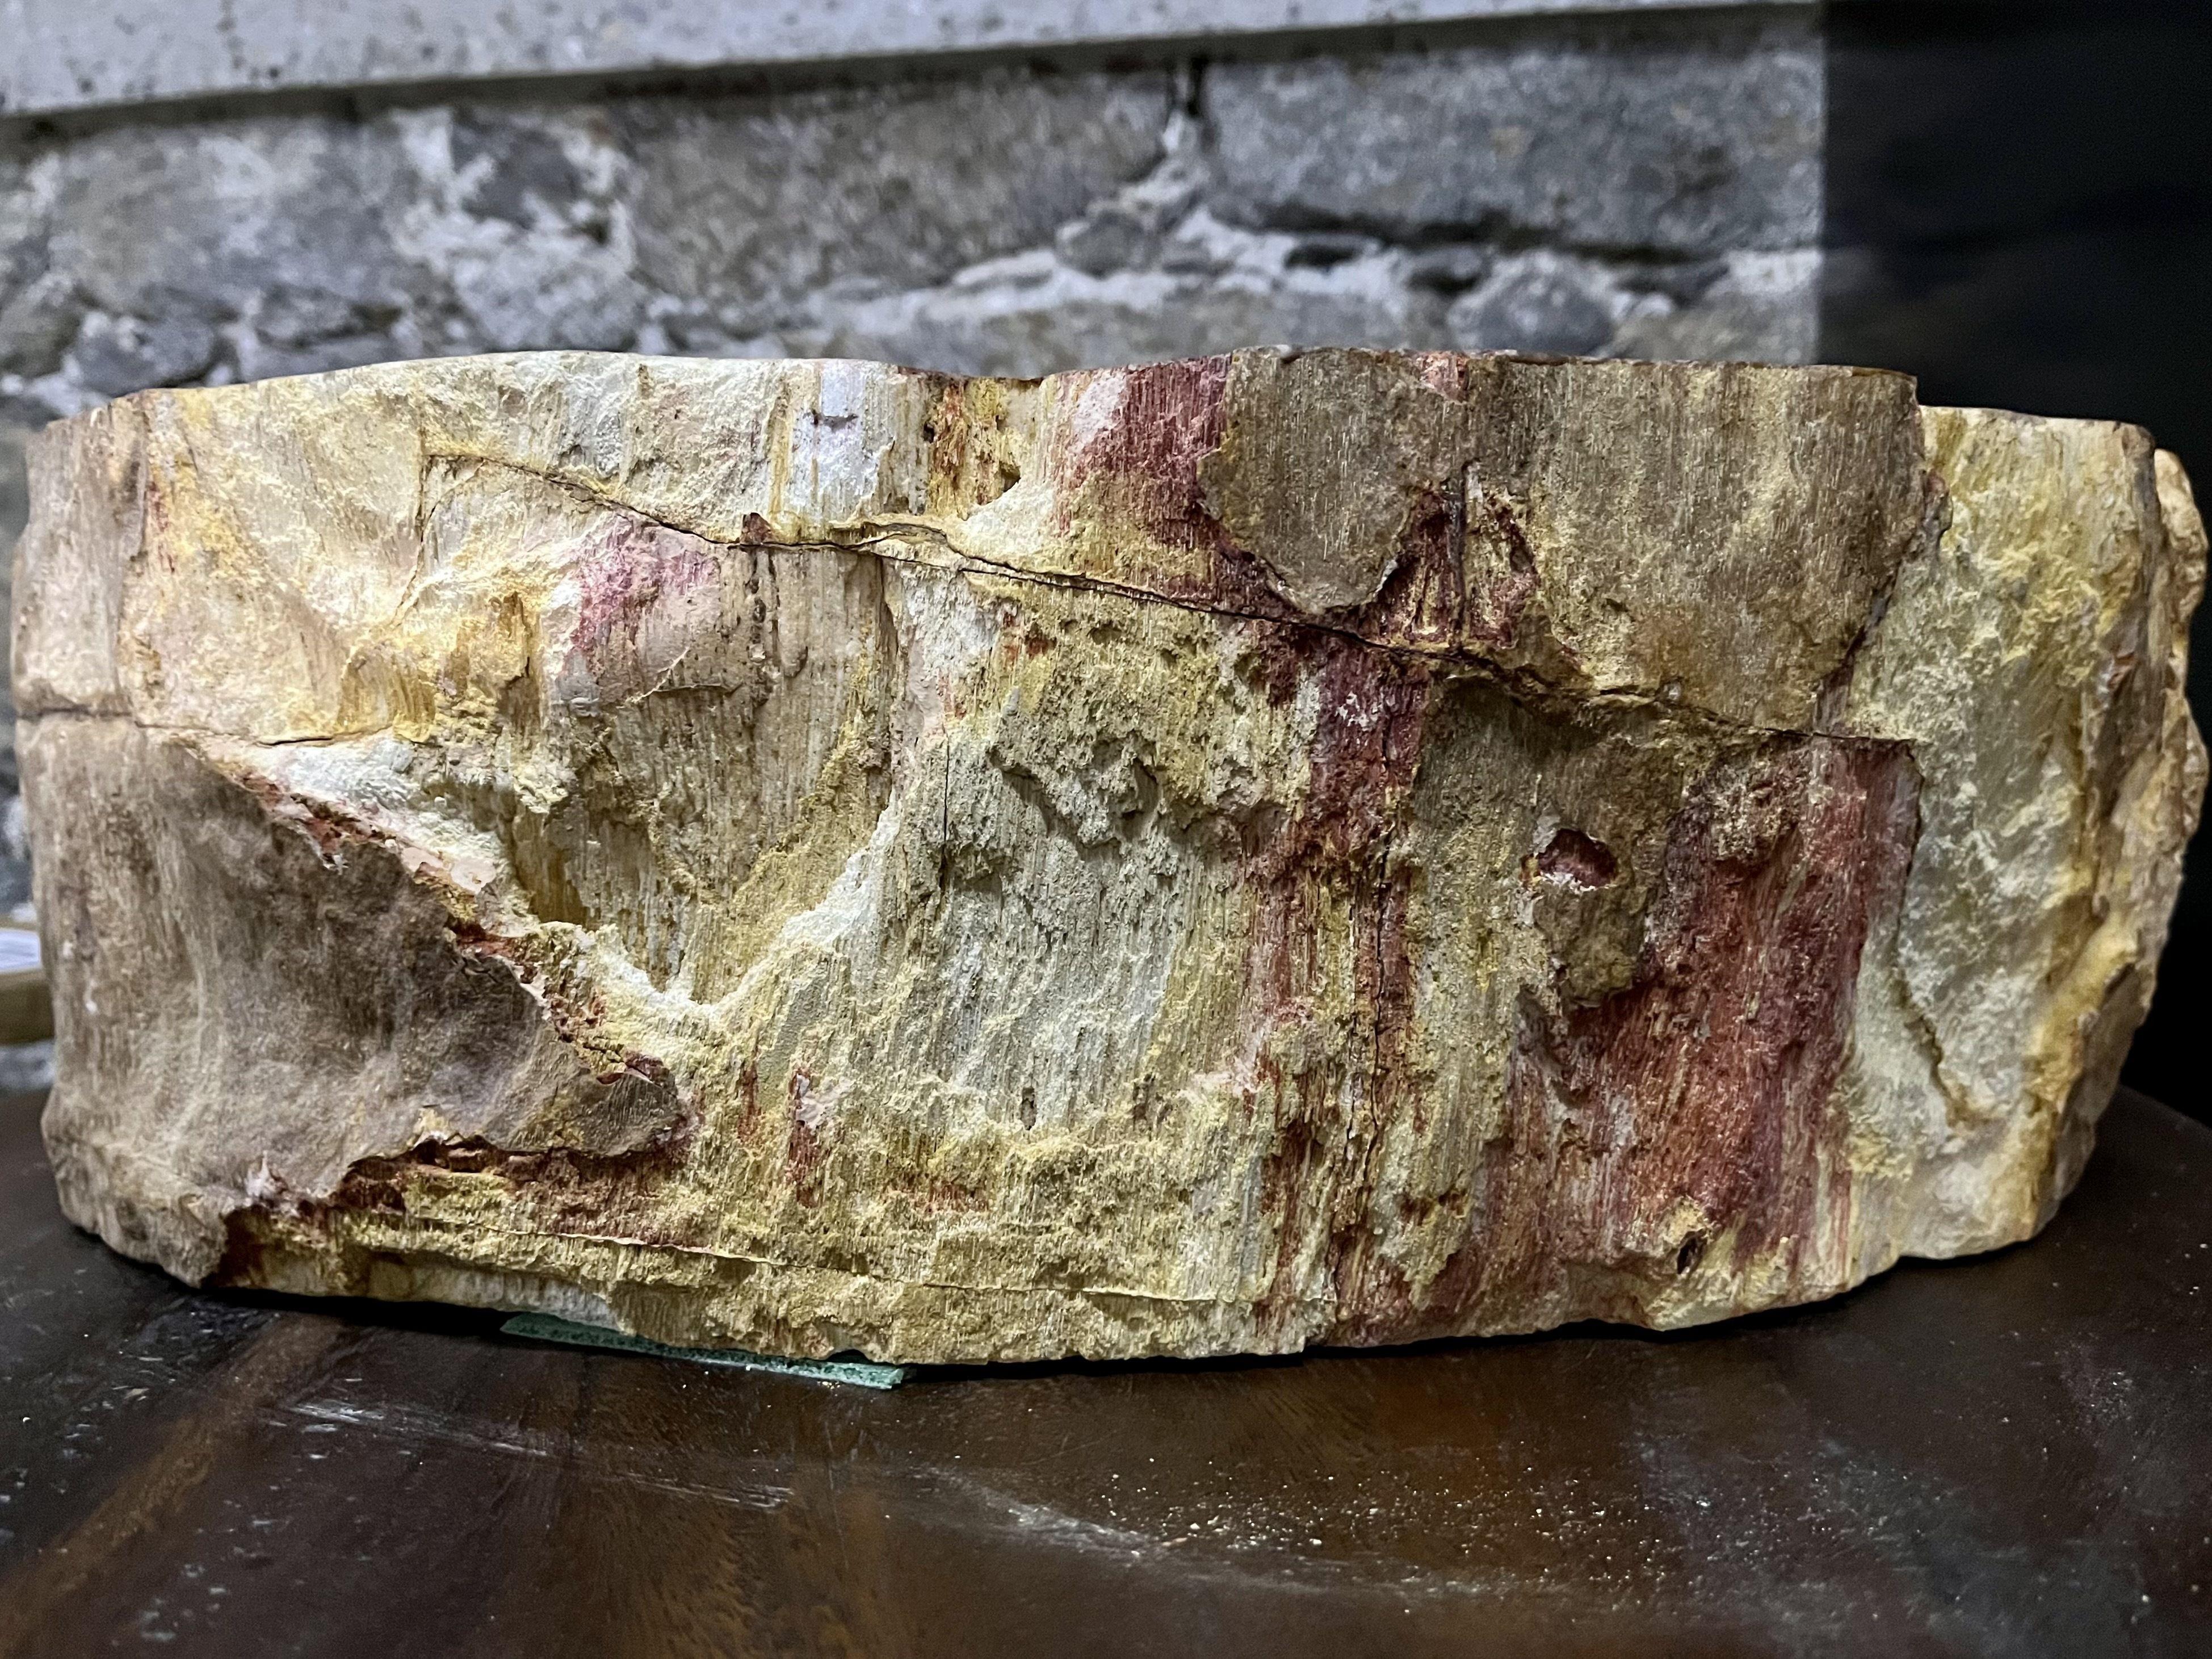 Beautiful petrified wood sink in absolute top quality. This single sink impresses with its unique shape and charming coloration in beige, brown and red tones. The inside of the sink has been polished while the outside shows the rough, original